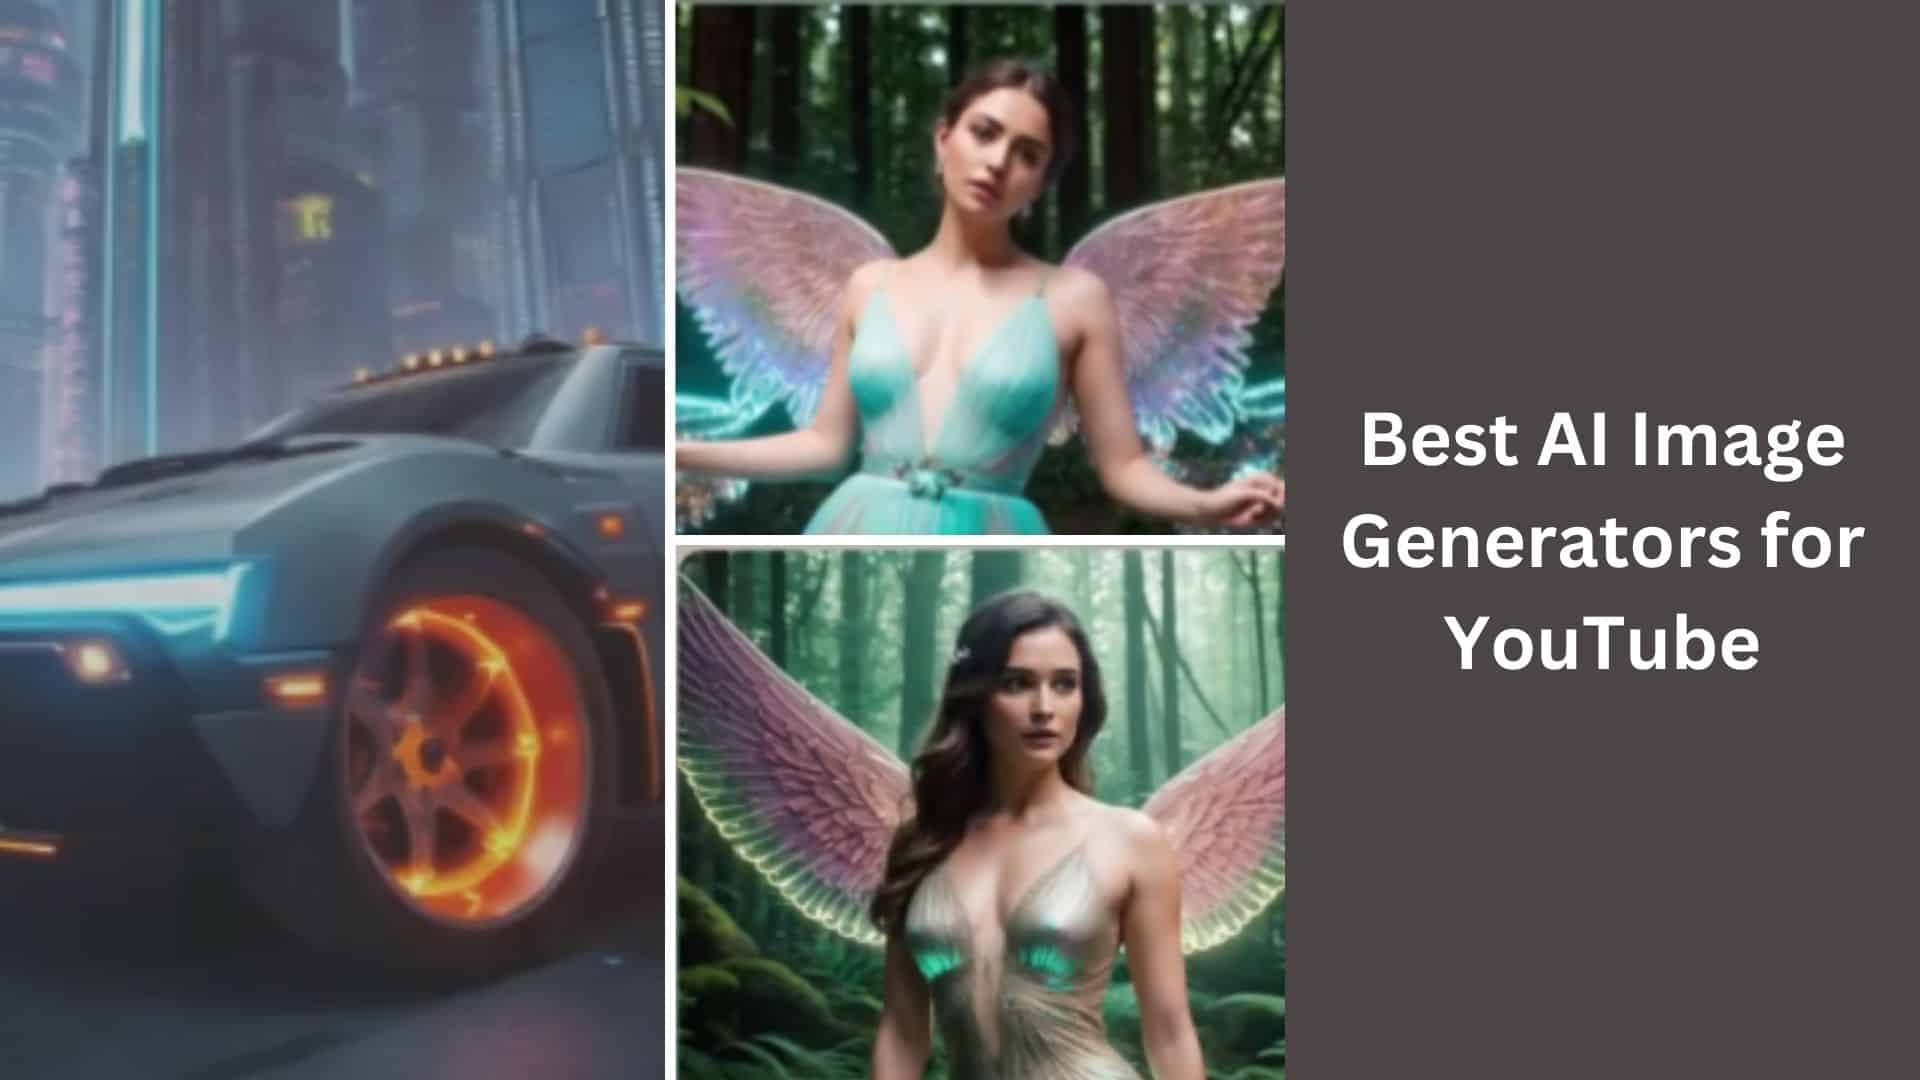 5 Best AI Image Generators for YouTube